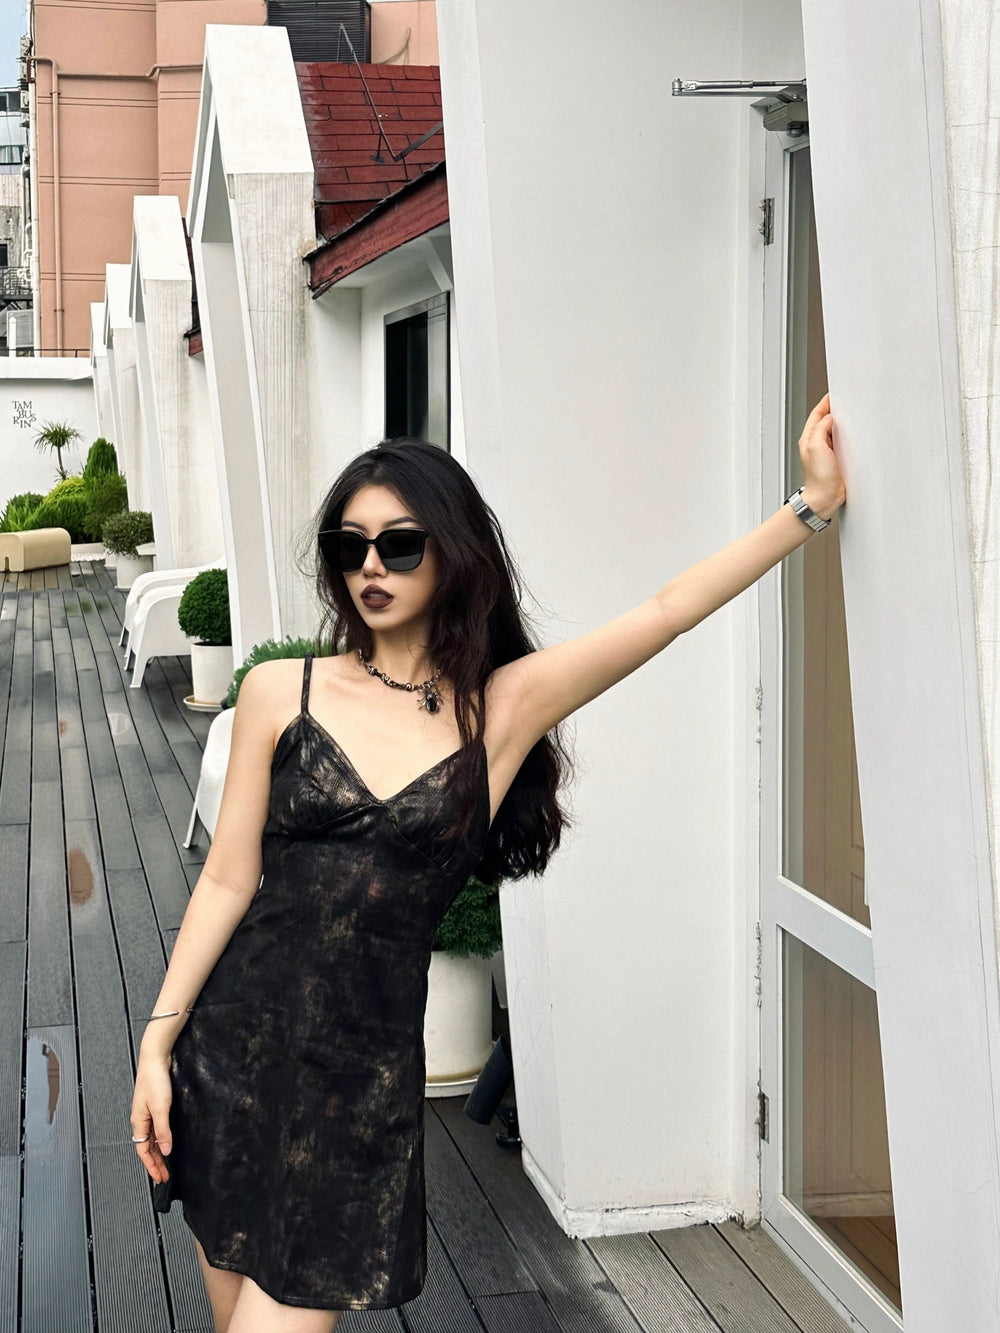 With an air of allure, a woman donning a chic black dress gracefully poses on a balcony, creating a captivating visual symphony wearing her Korean fashionable sunglasses.